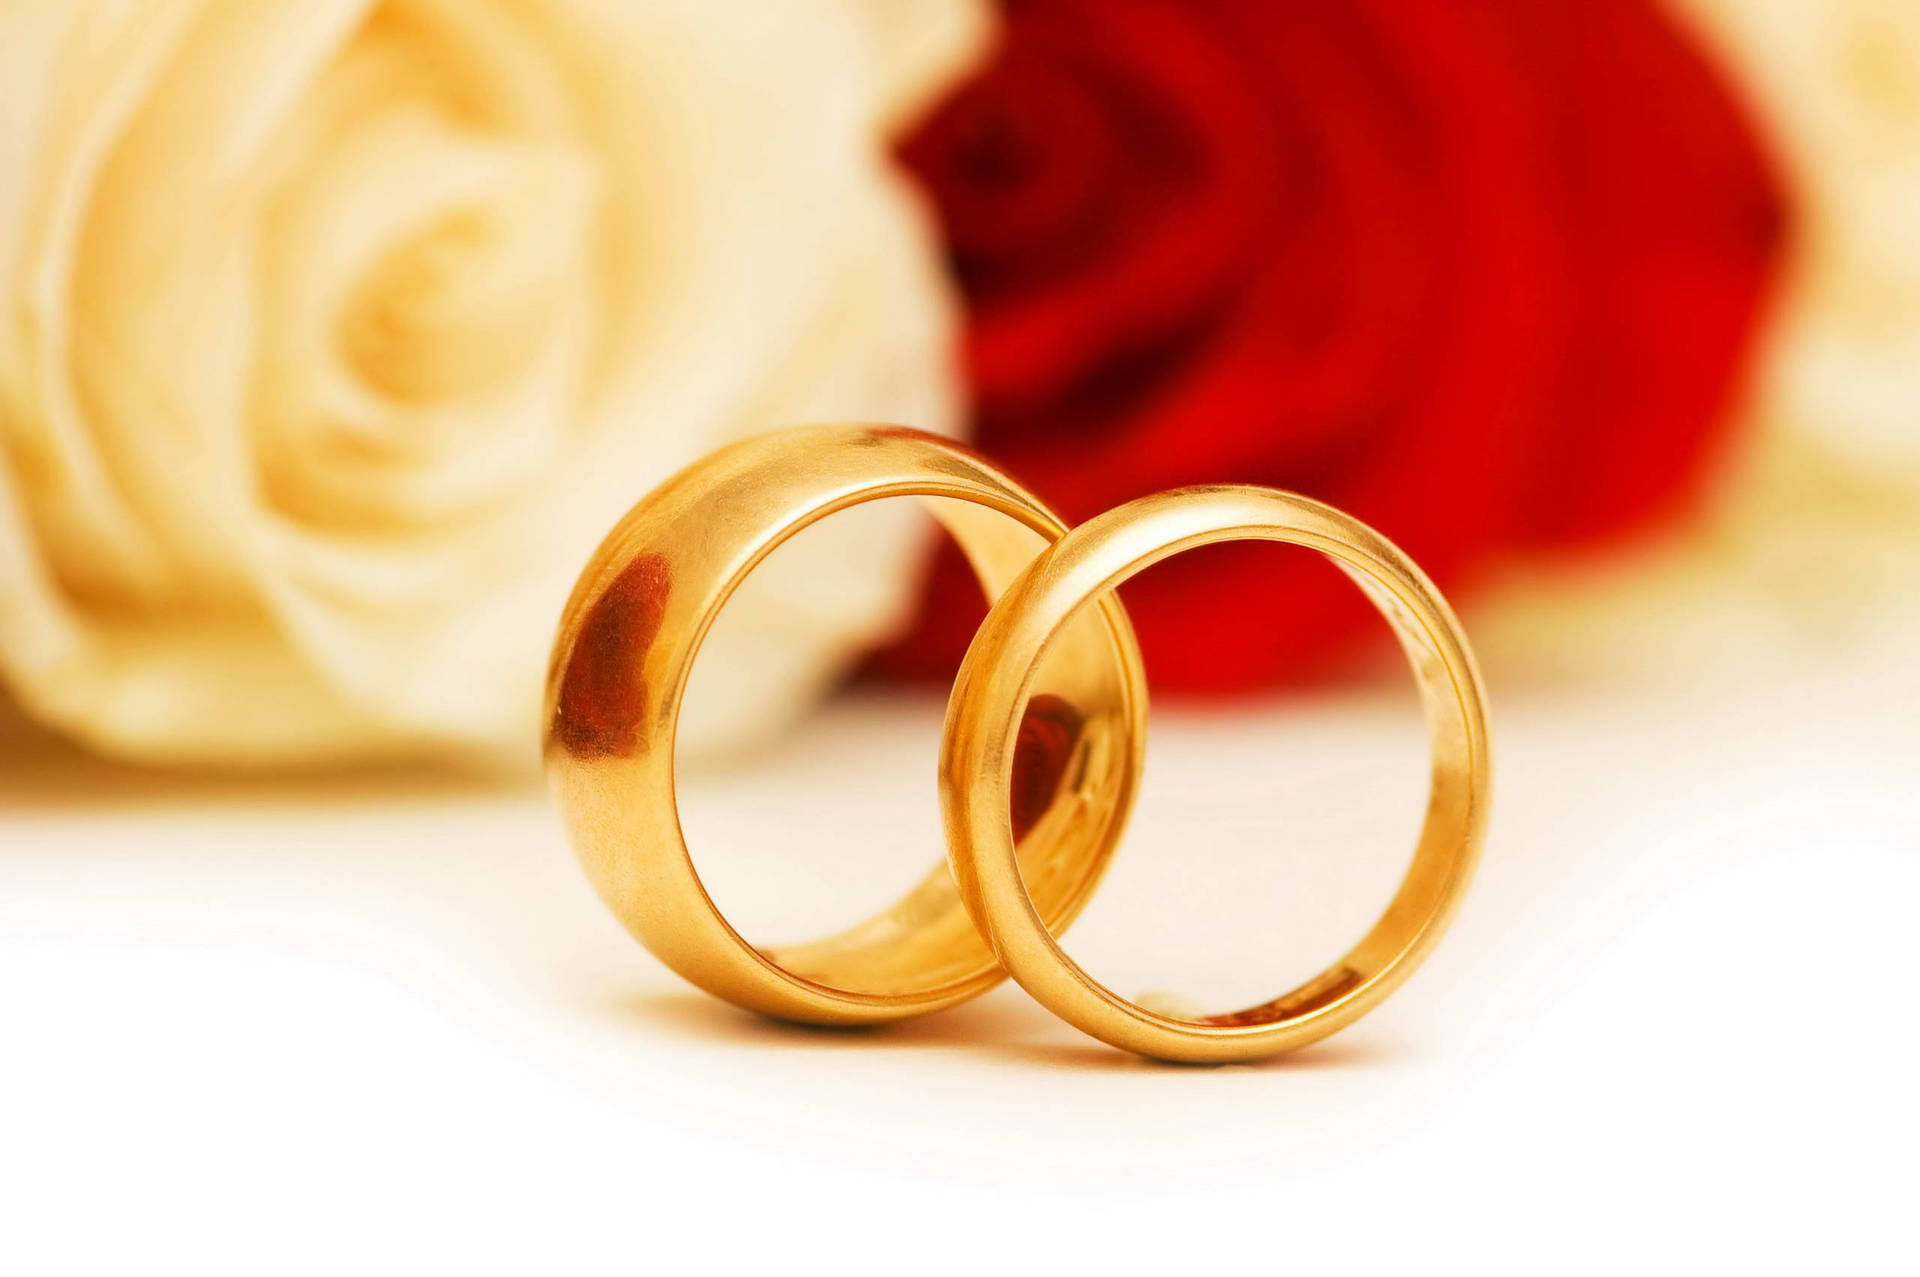 Gold Wedding Rings And Roses Background